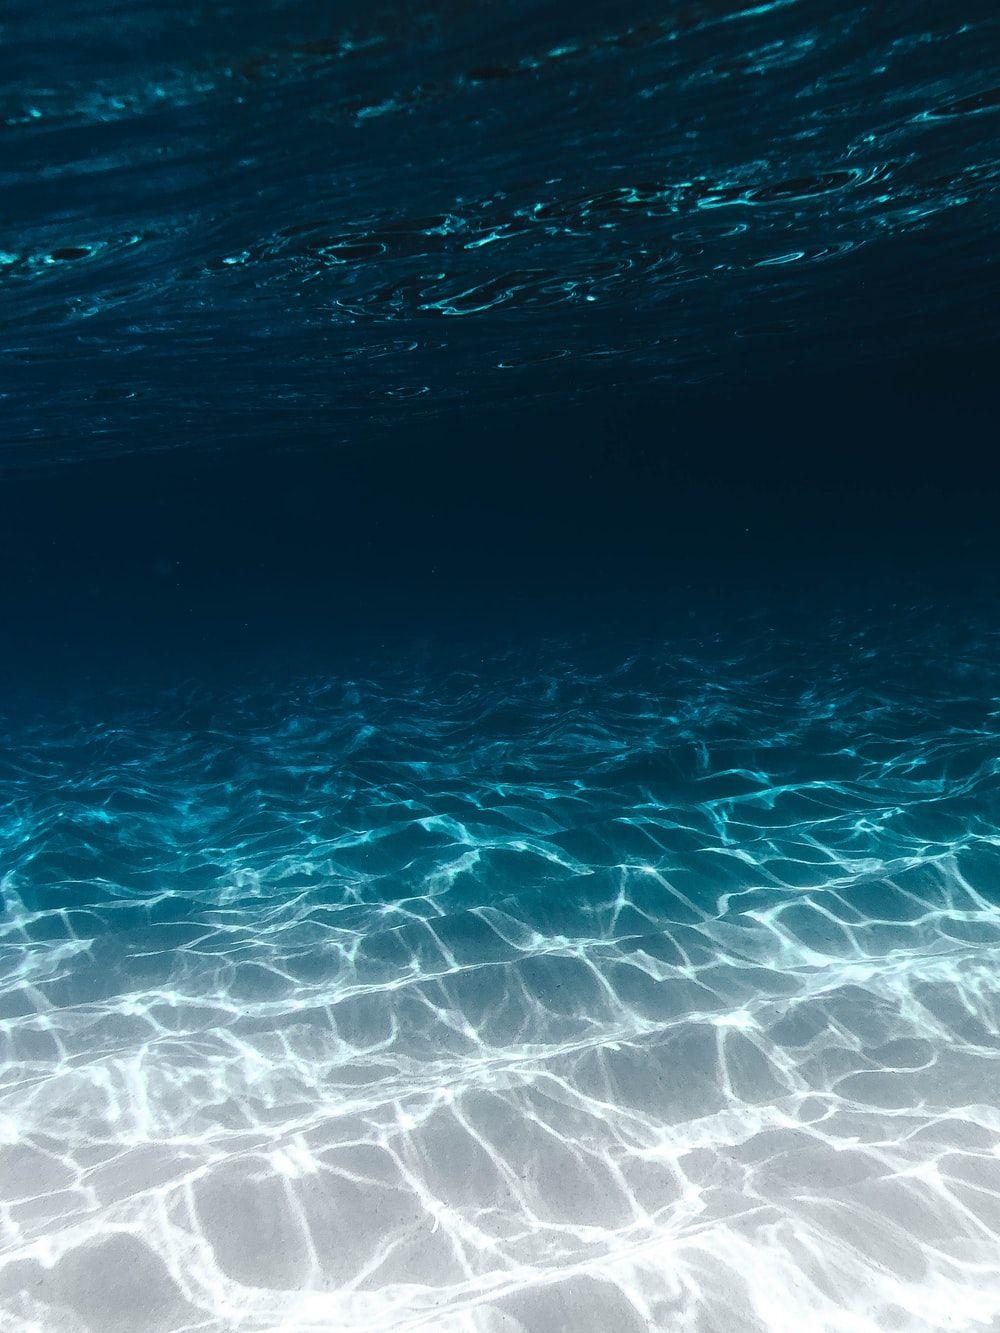 Underwater Photography HD Wallpapers - Top Free Underwater Photography ...